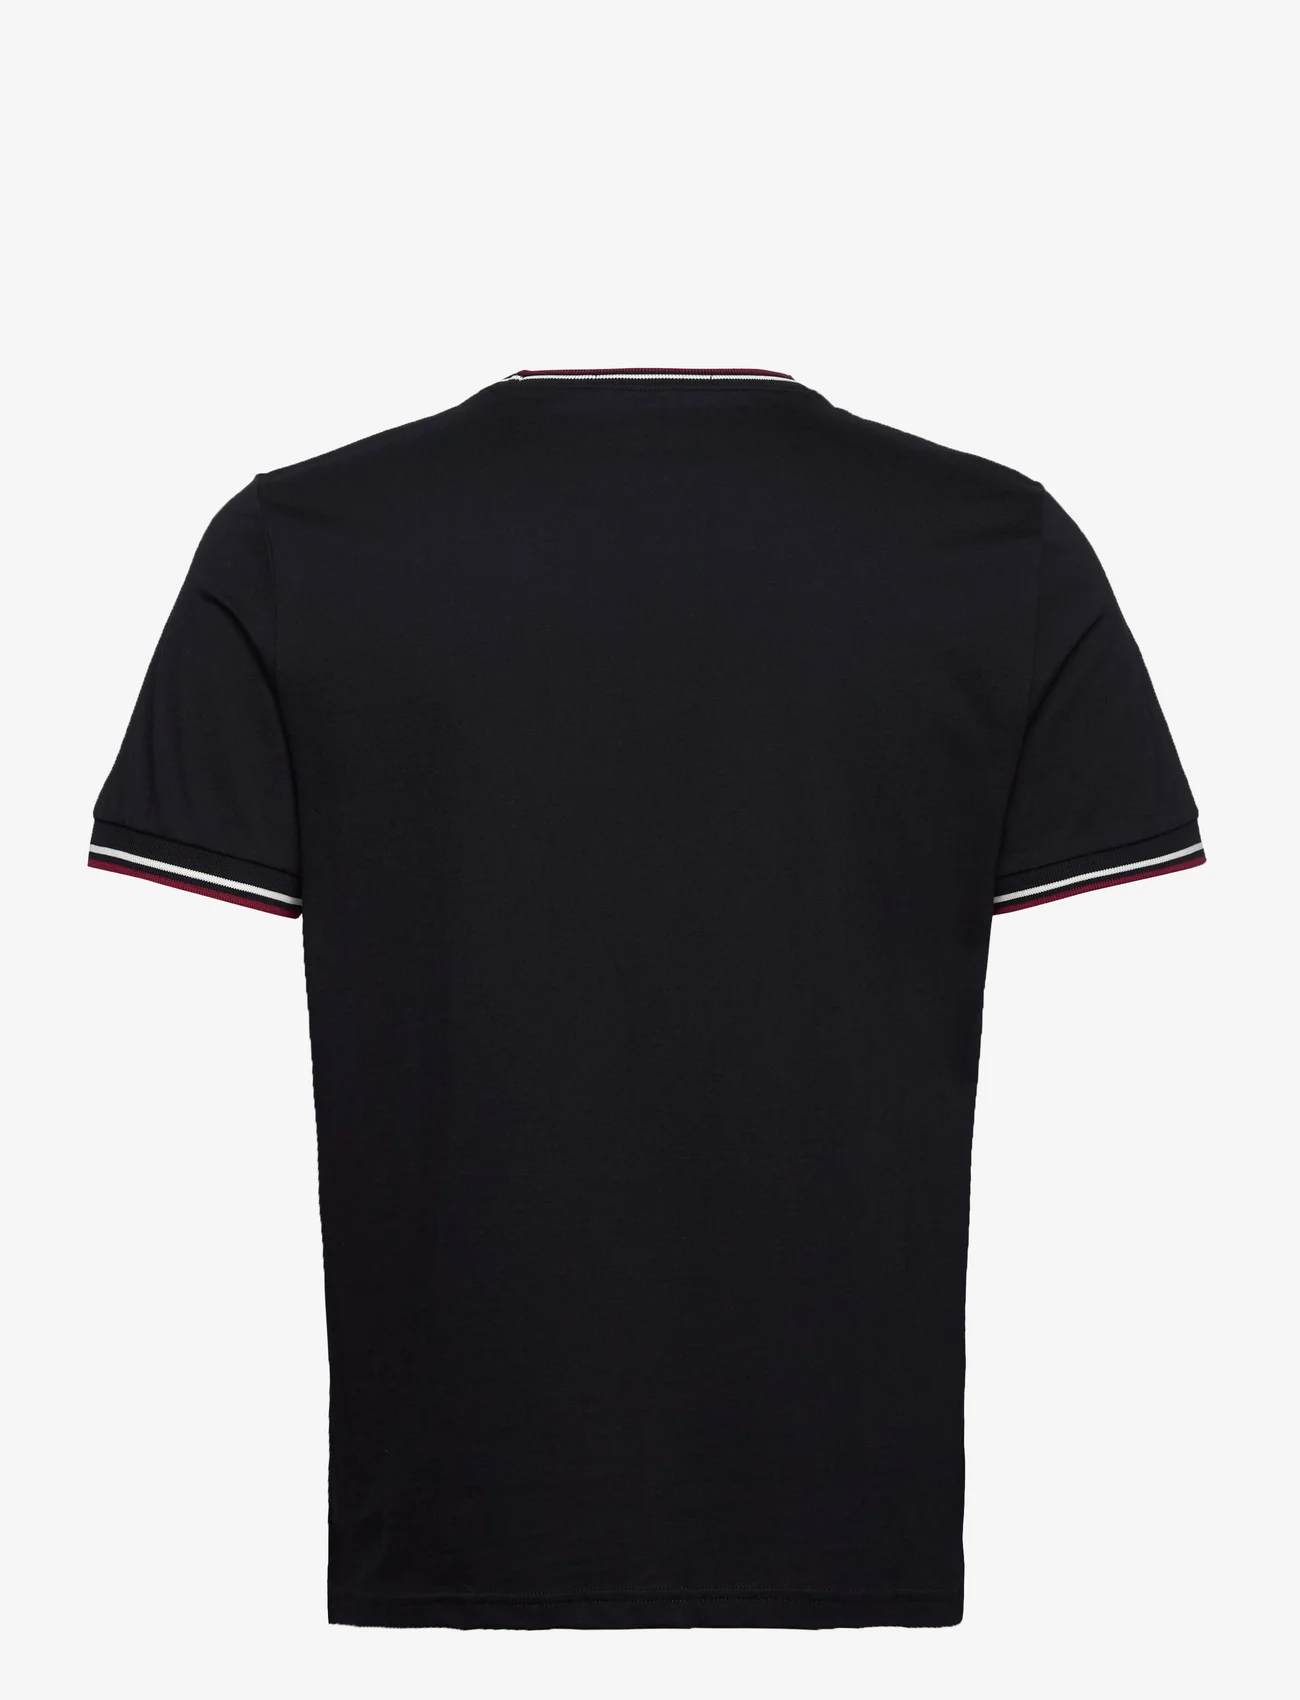 Fred Perry - TWIN TIPPED T-SHIRT - perus t-paidat - nvy/swht/bntred - 1